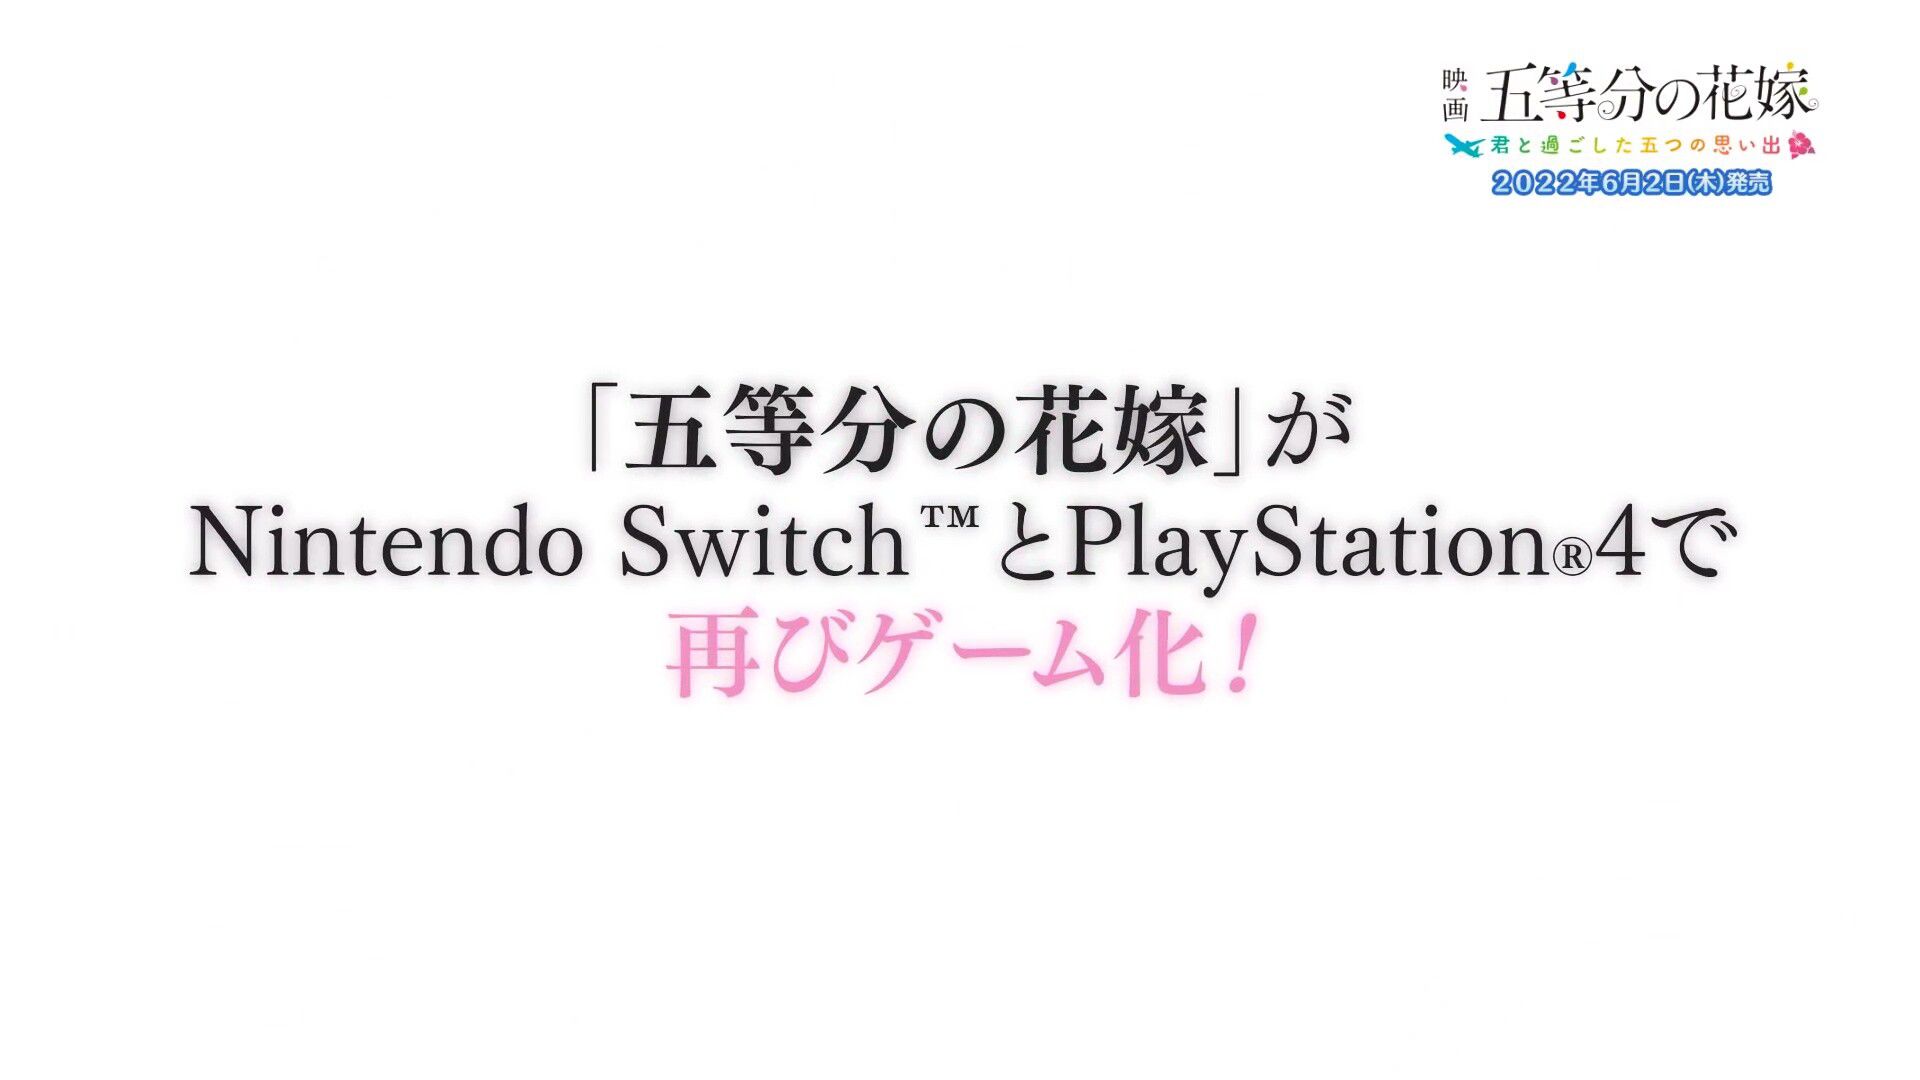 PS4 / Switch "Movie "Five Memories Of Five Equals" - Five Memories Spent With You" Girls' Erotic Swimsuits, etc. 5